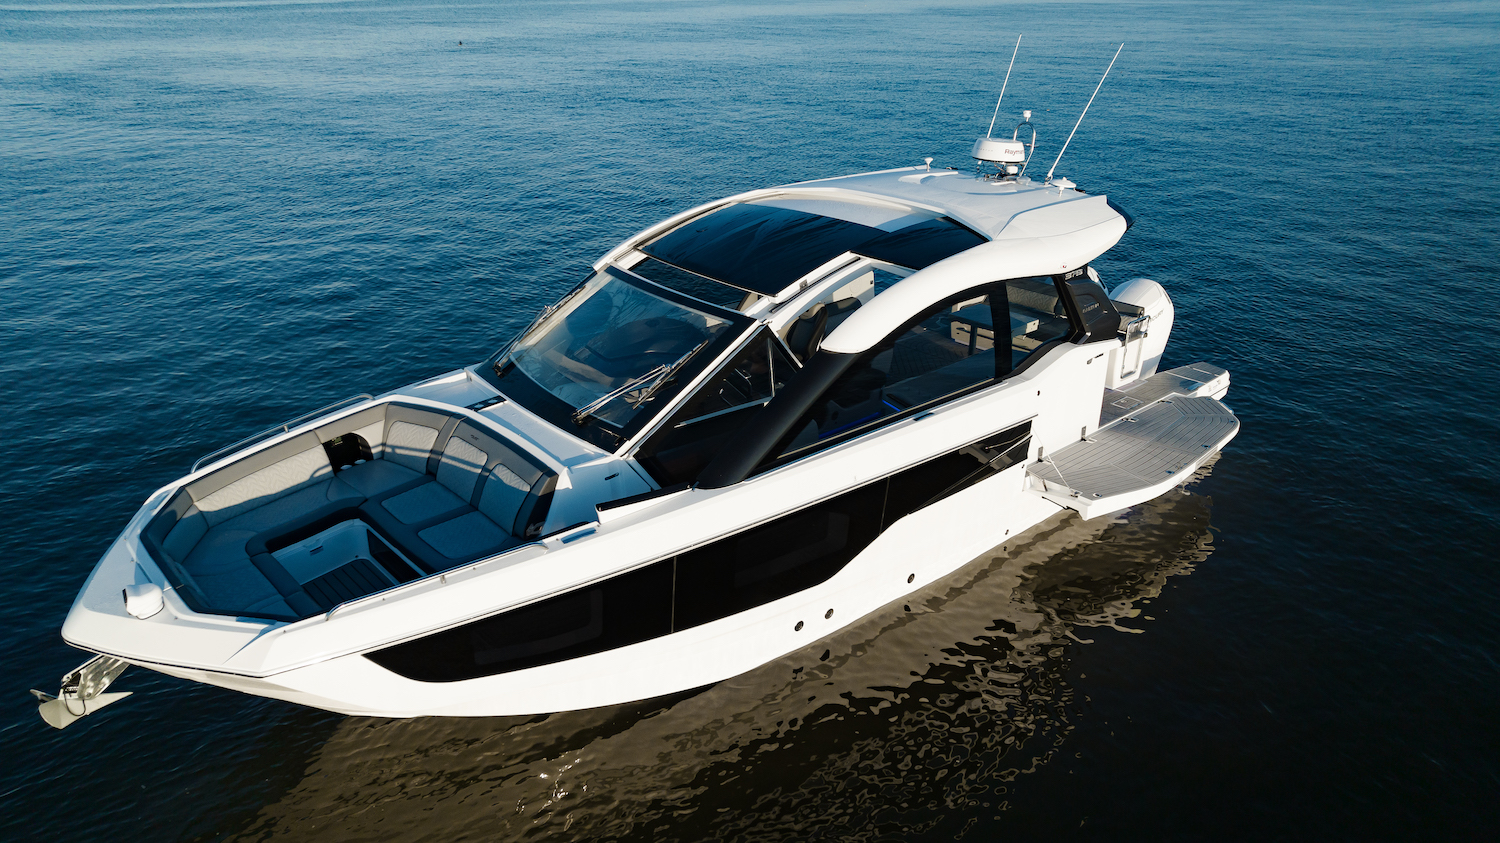 Galeon to Debut 375 GTO and 800 FLY at FLIBS